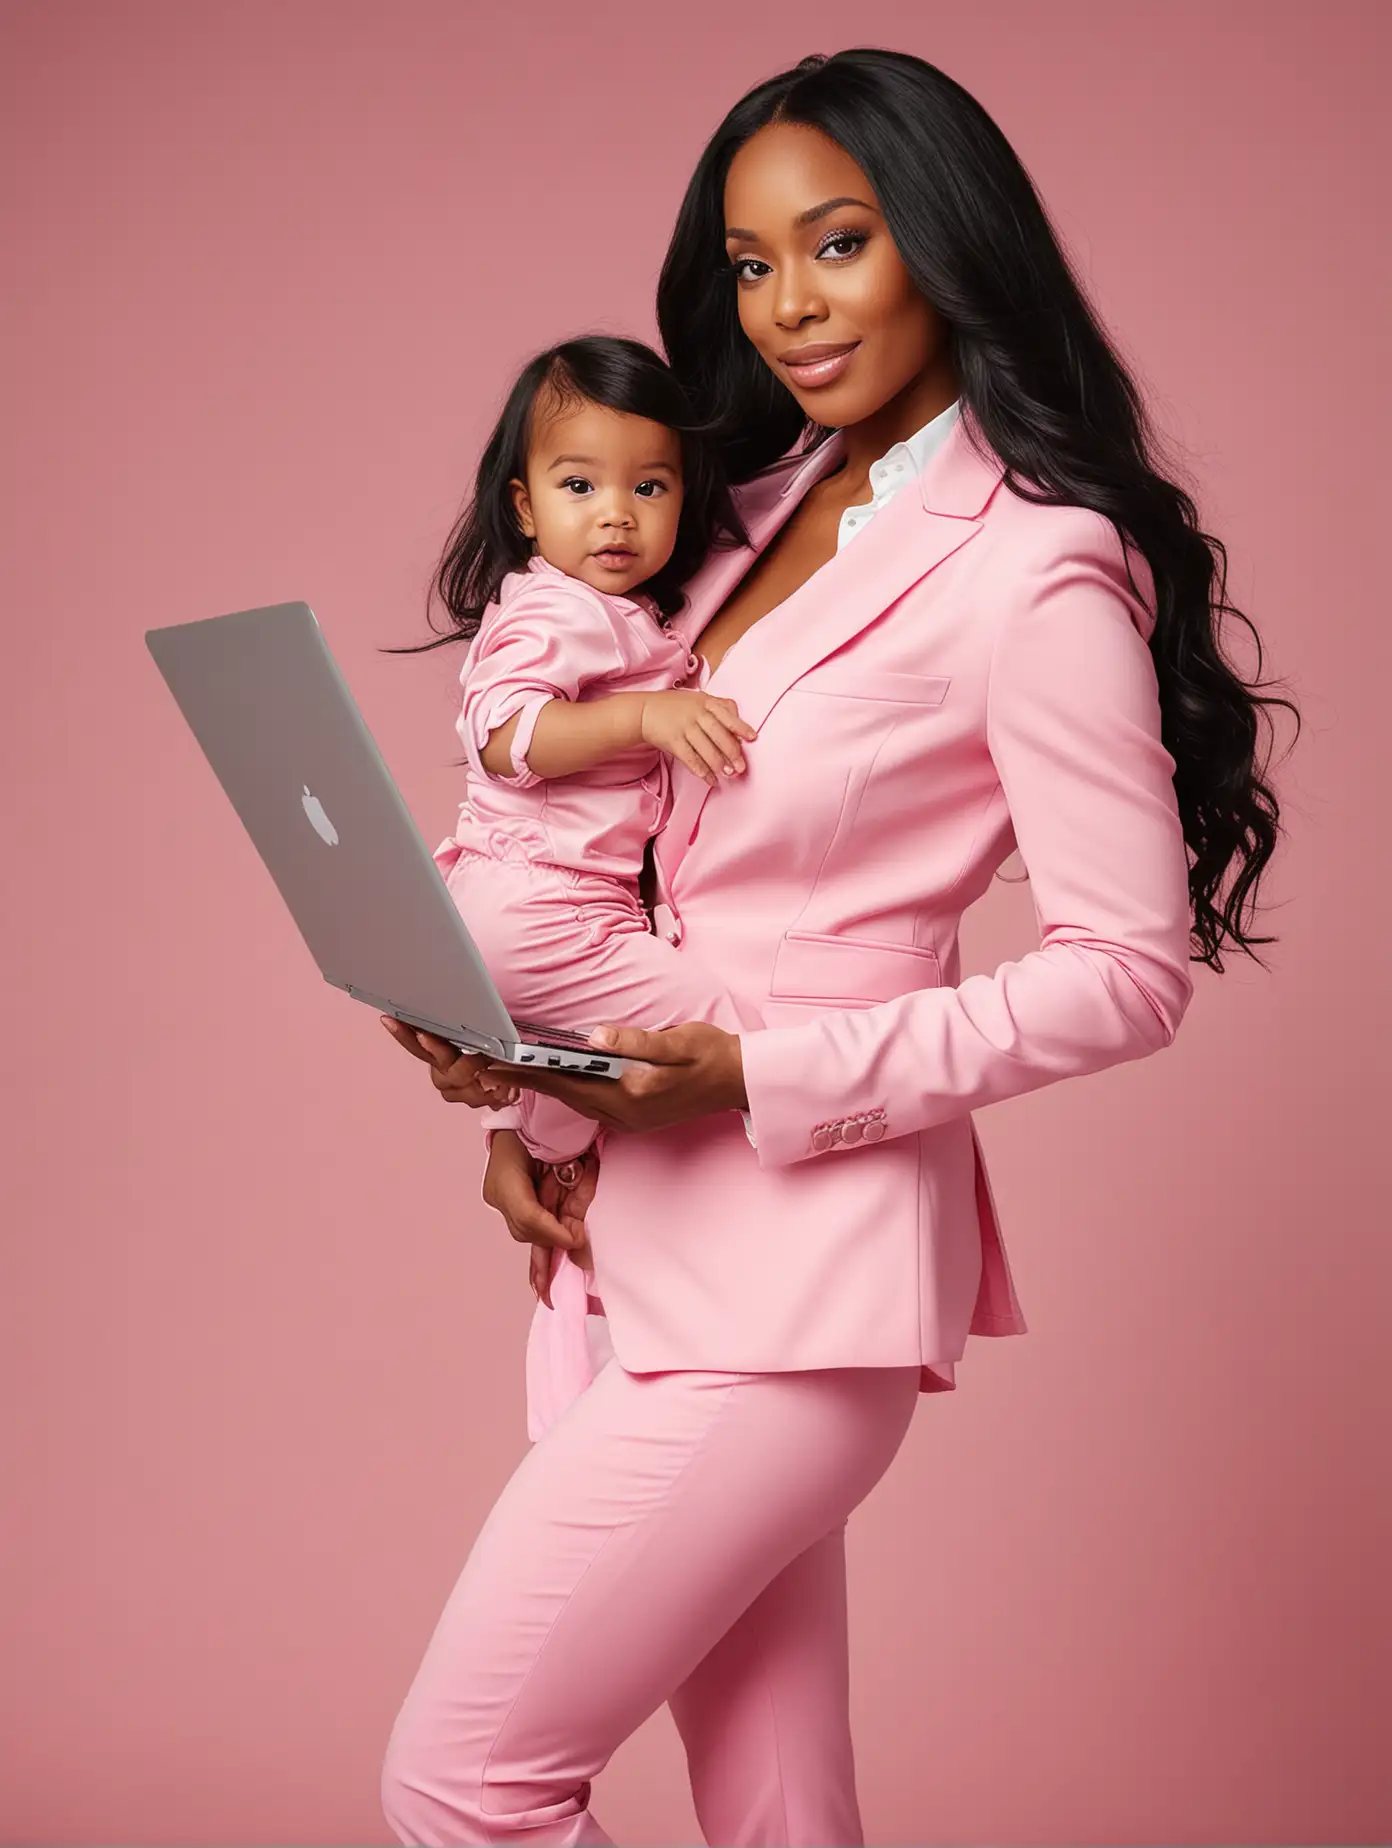 A professional African American woman, with long black hair extensions, gracefully balances her laptop work with holding her baby girl in her arms. She exudes confidence in a stylish pink suit, capturing the essence of a modern working mother in a full-body photoshoot.